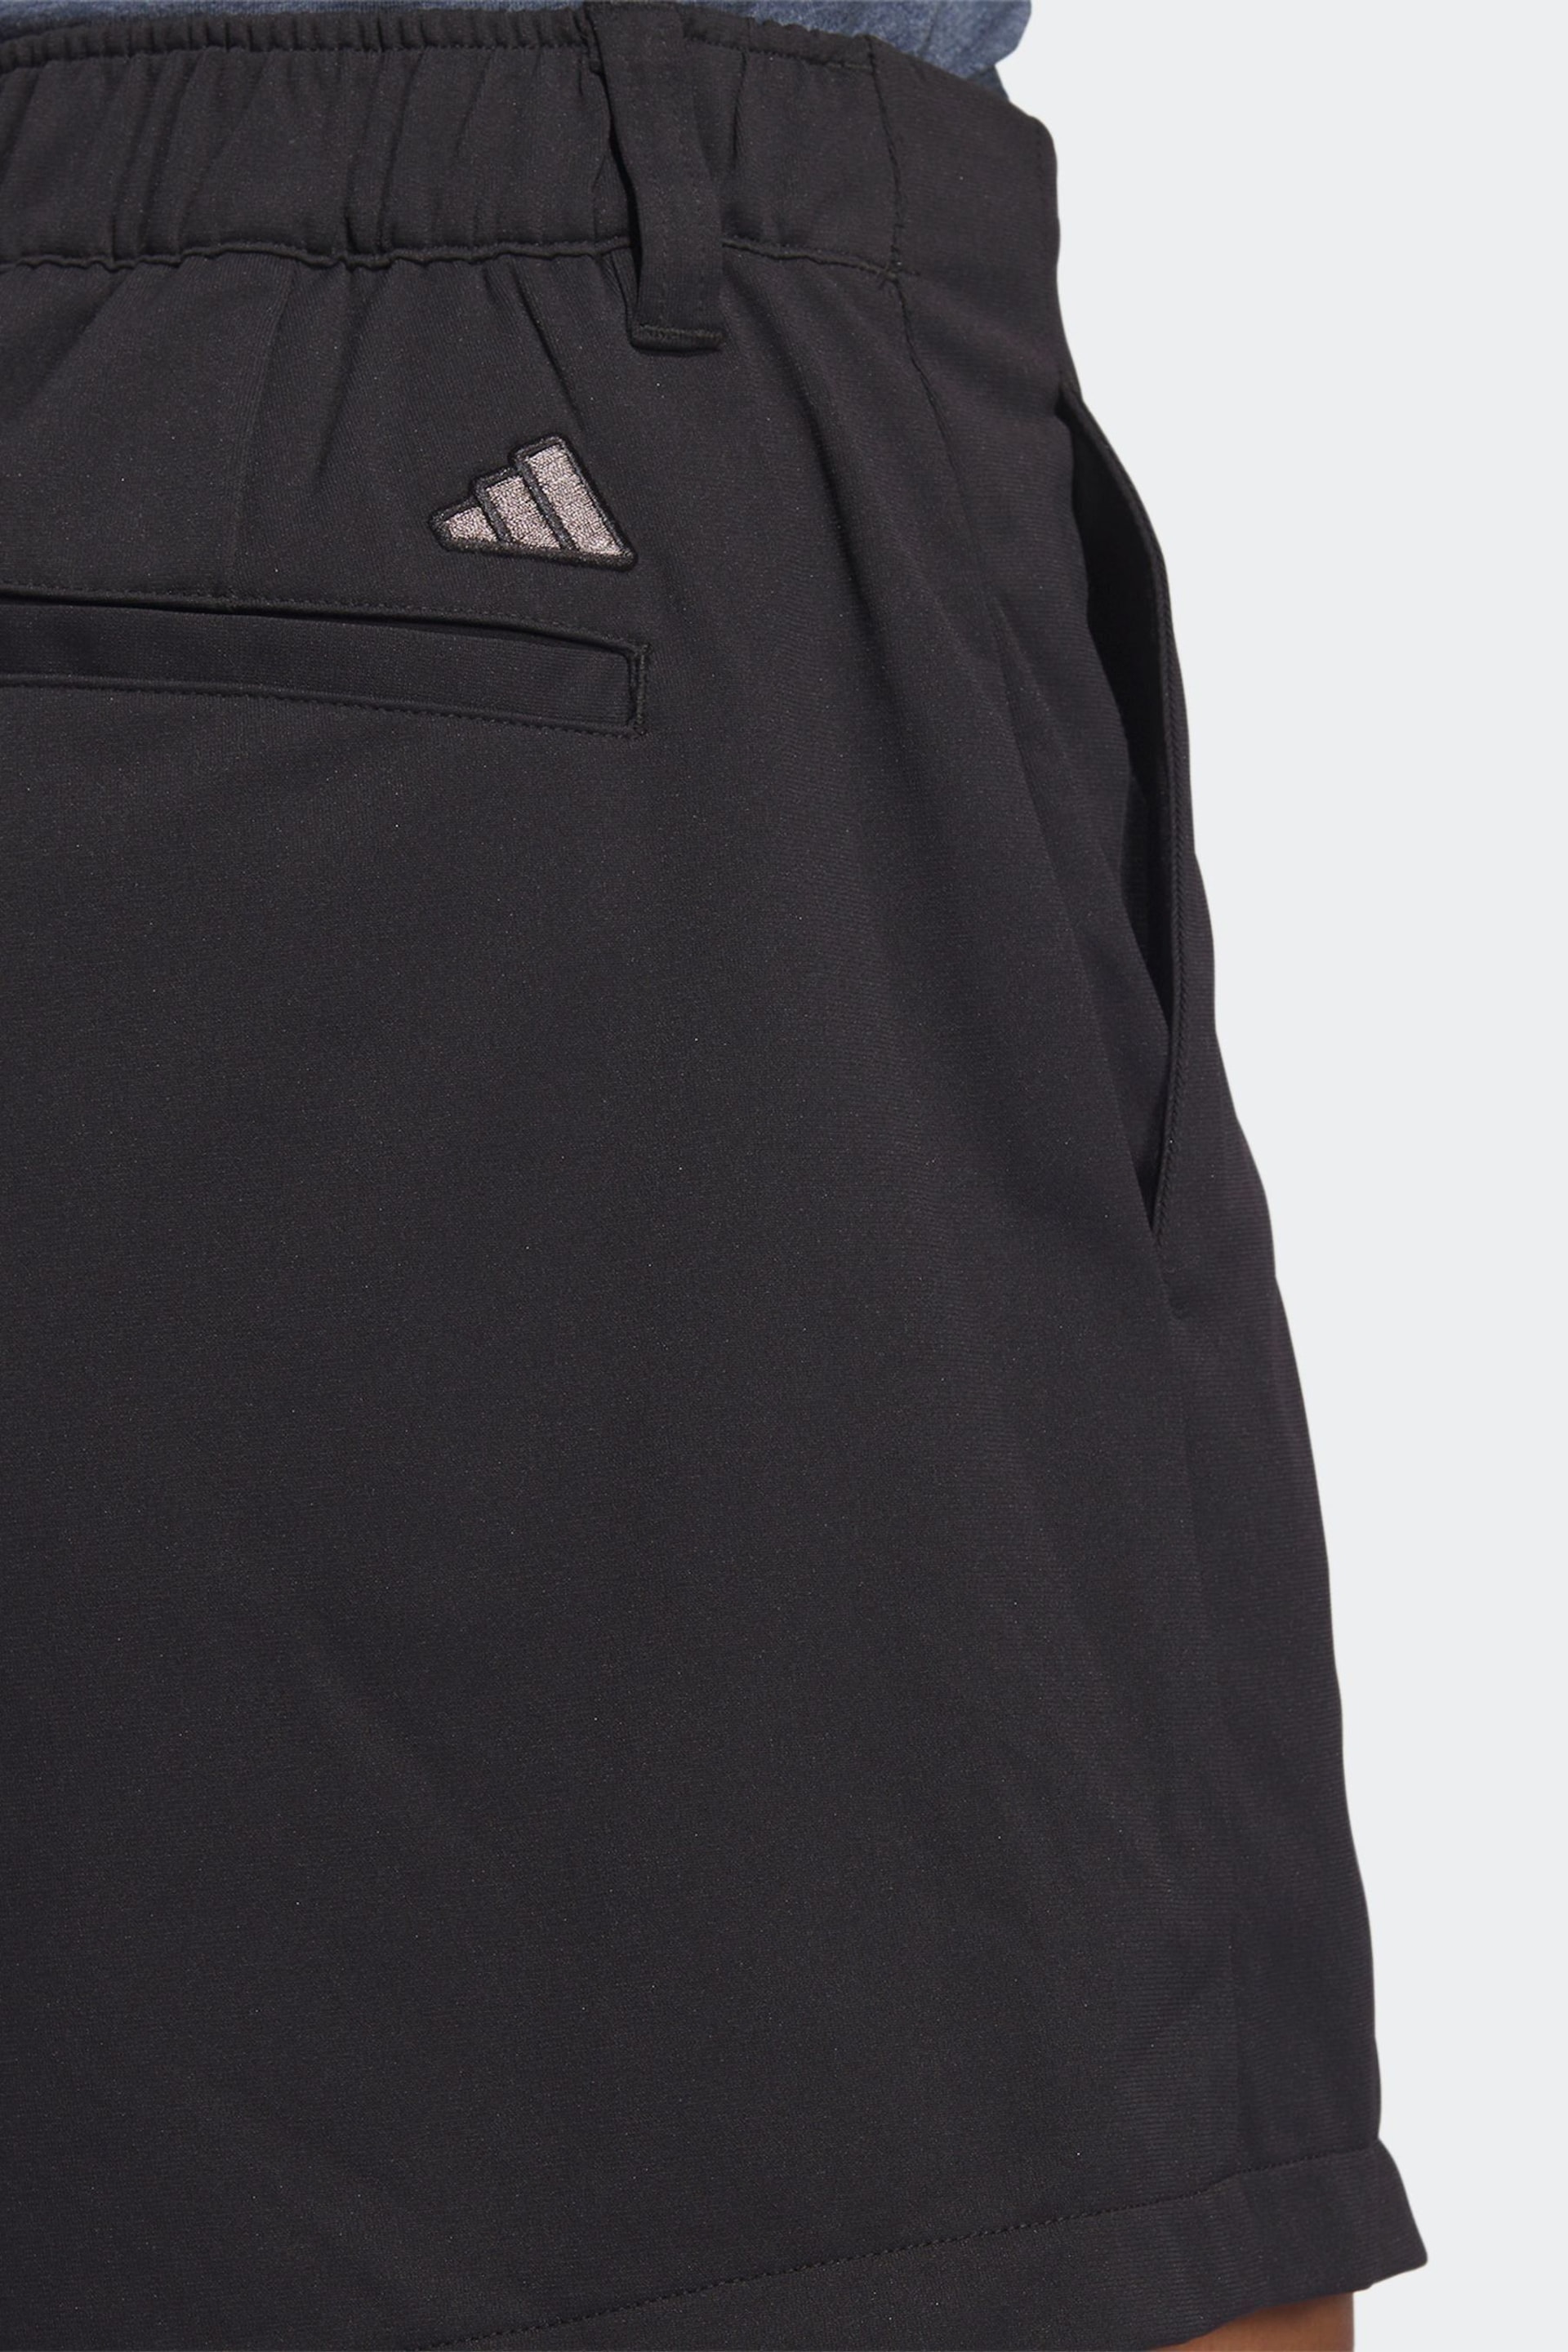 adidas Golf Go-To Pleated Shorts - Image 7 of 8